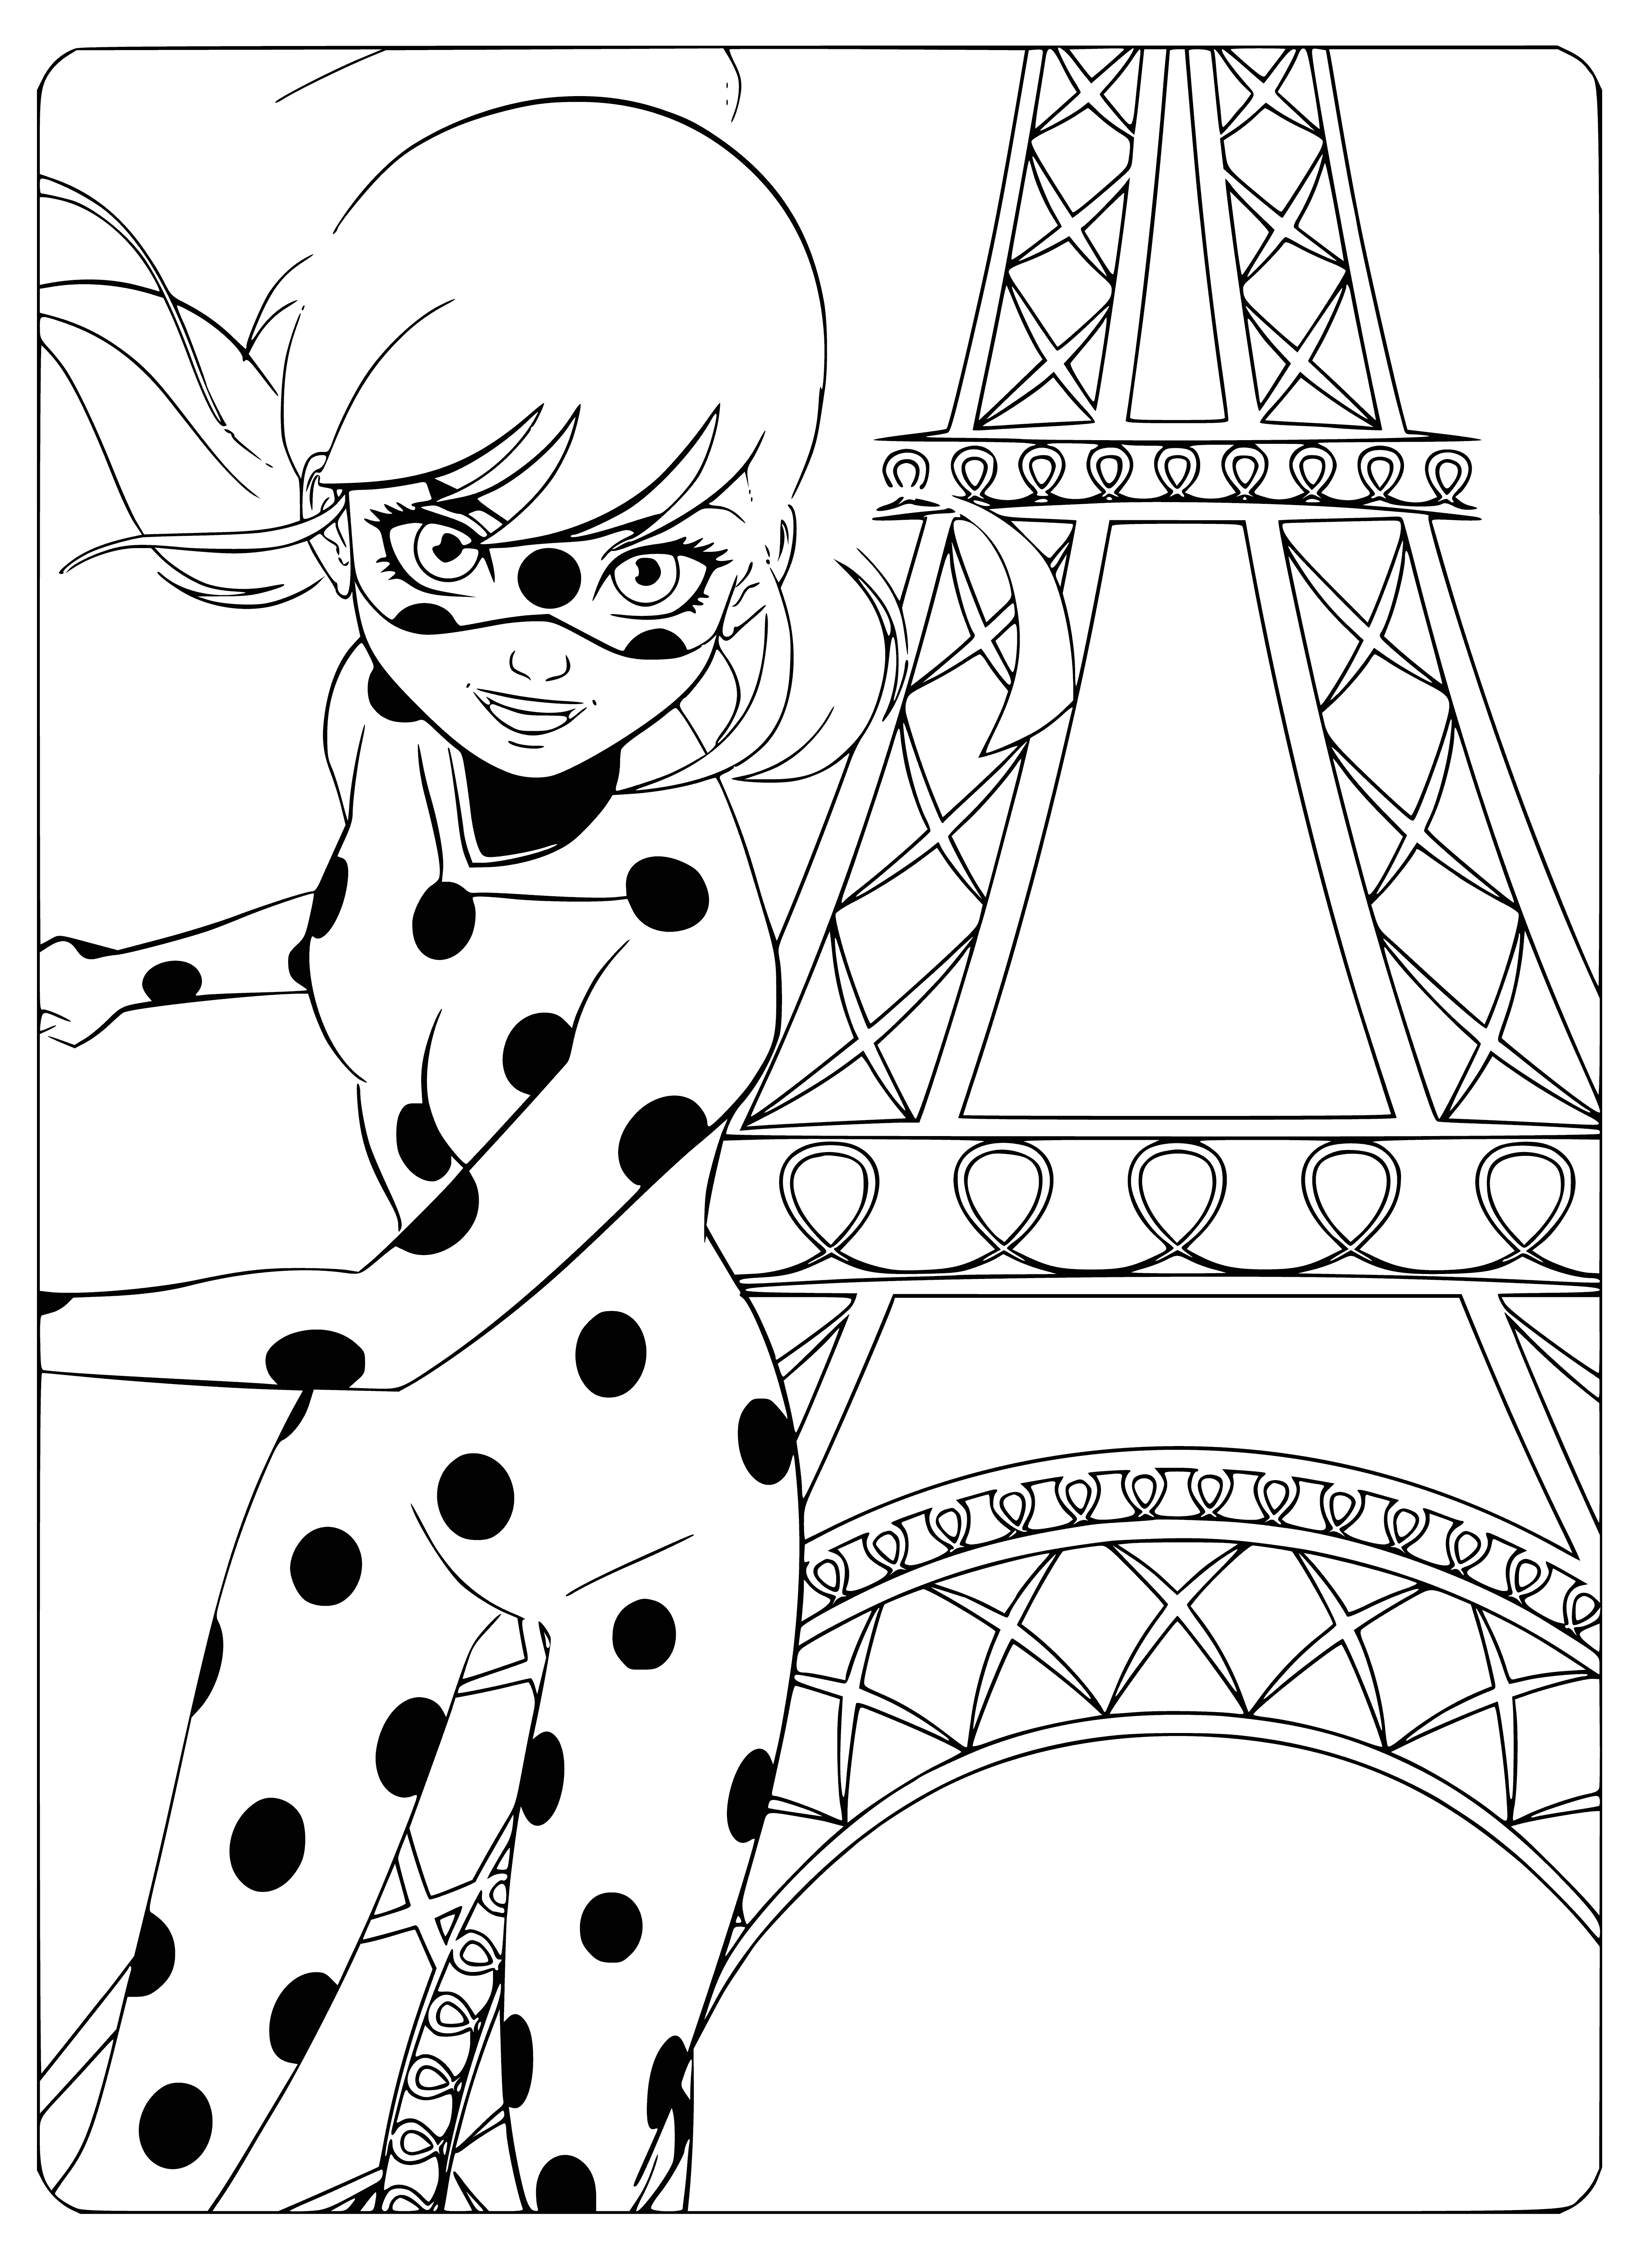 coloring page: Ladybug takes in the sights of Paris while standing atop a building, Eiffel Tower visible in the peaceful, blue sky.